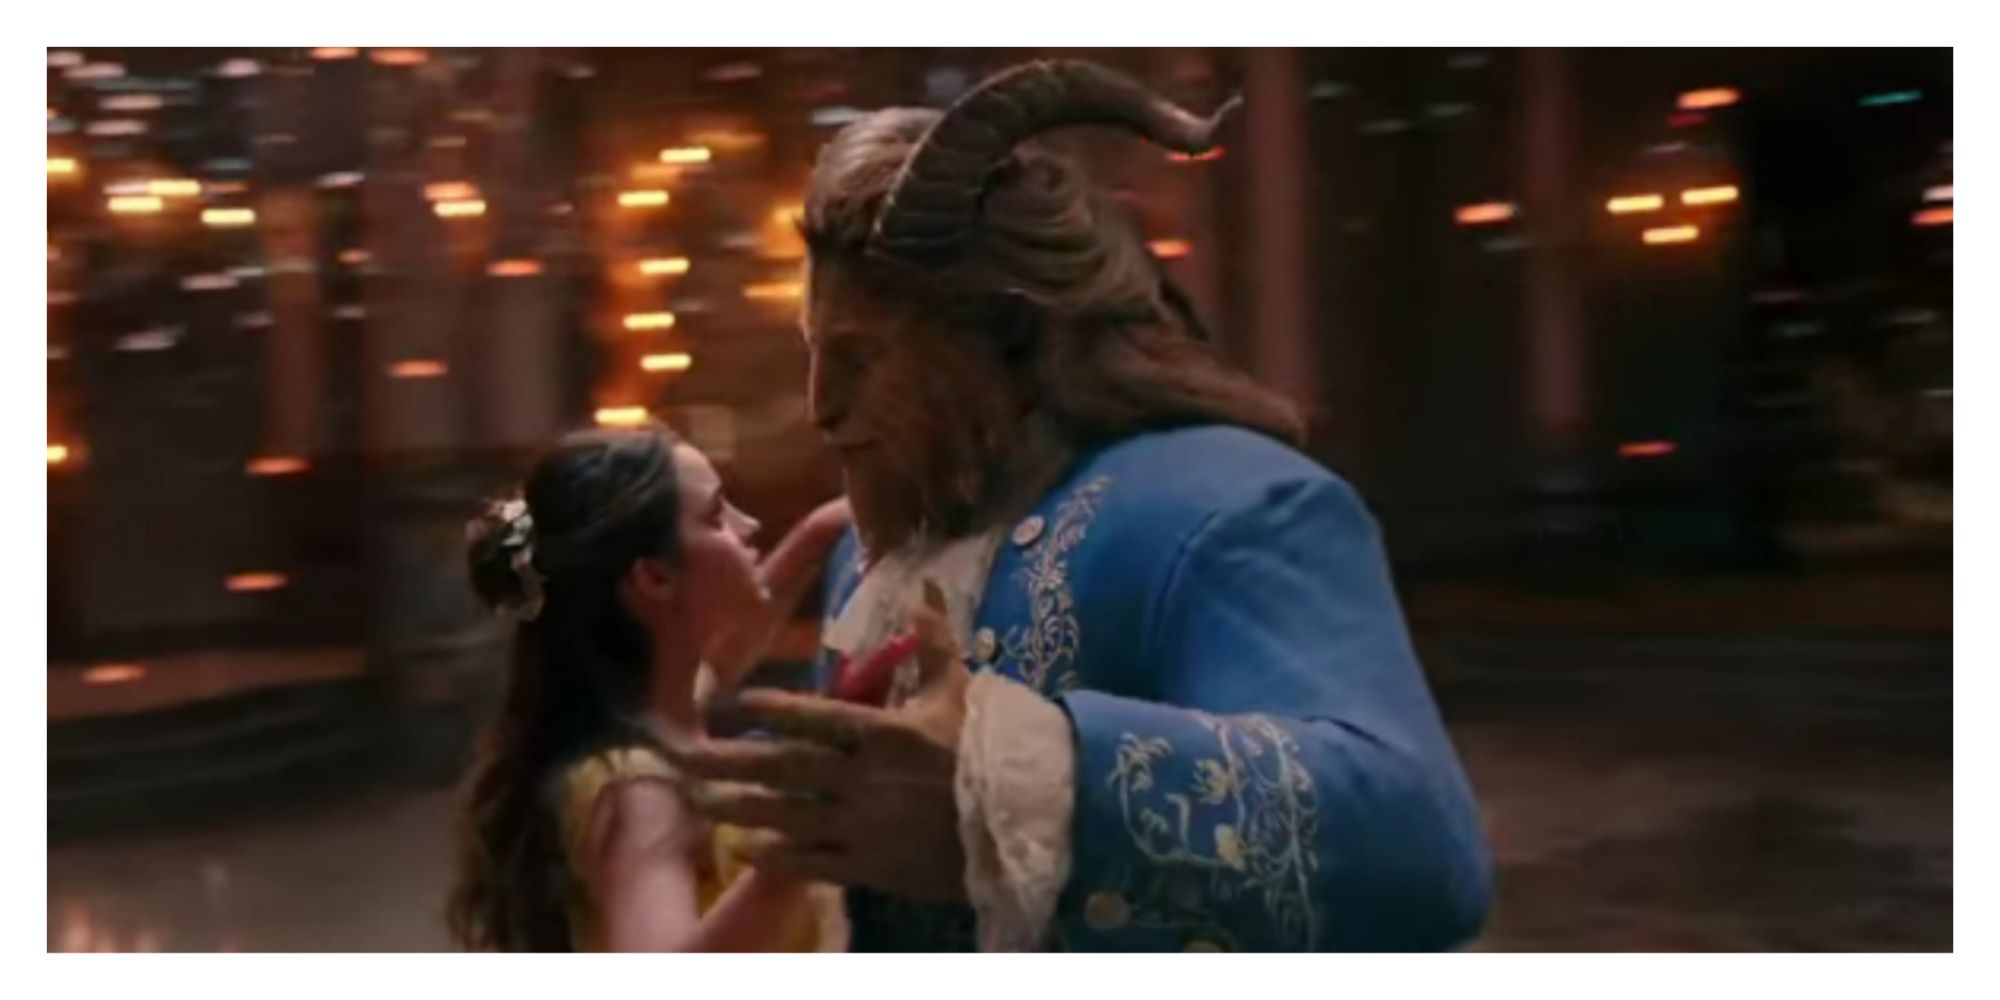 Beauty and the beast ballroom dance in the remake